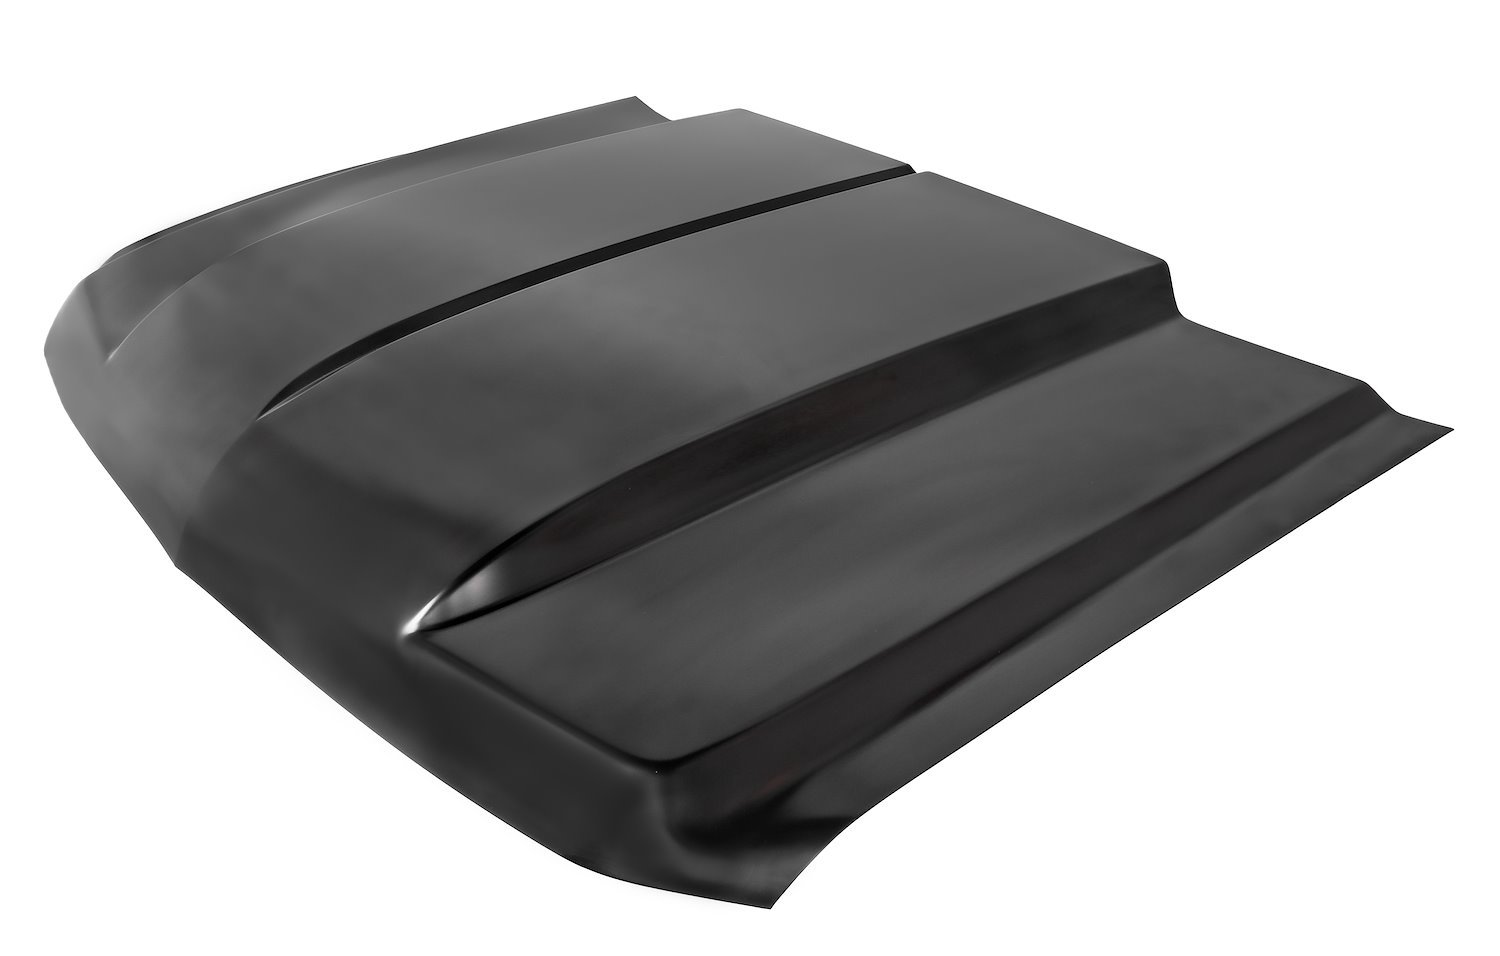 Cowl Induction Hood for Select 2007-2013 Chevrolet Trucks